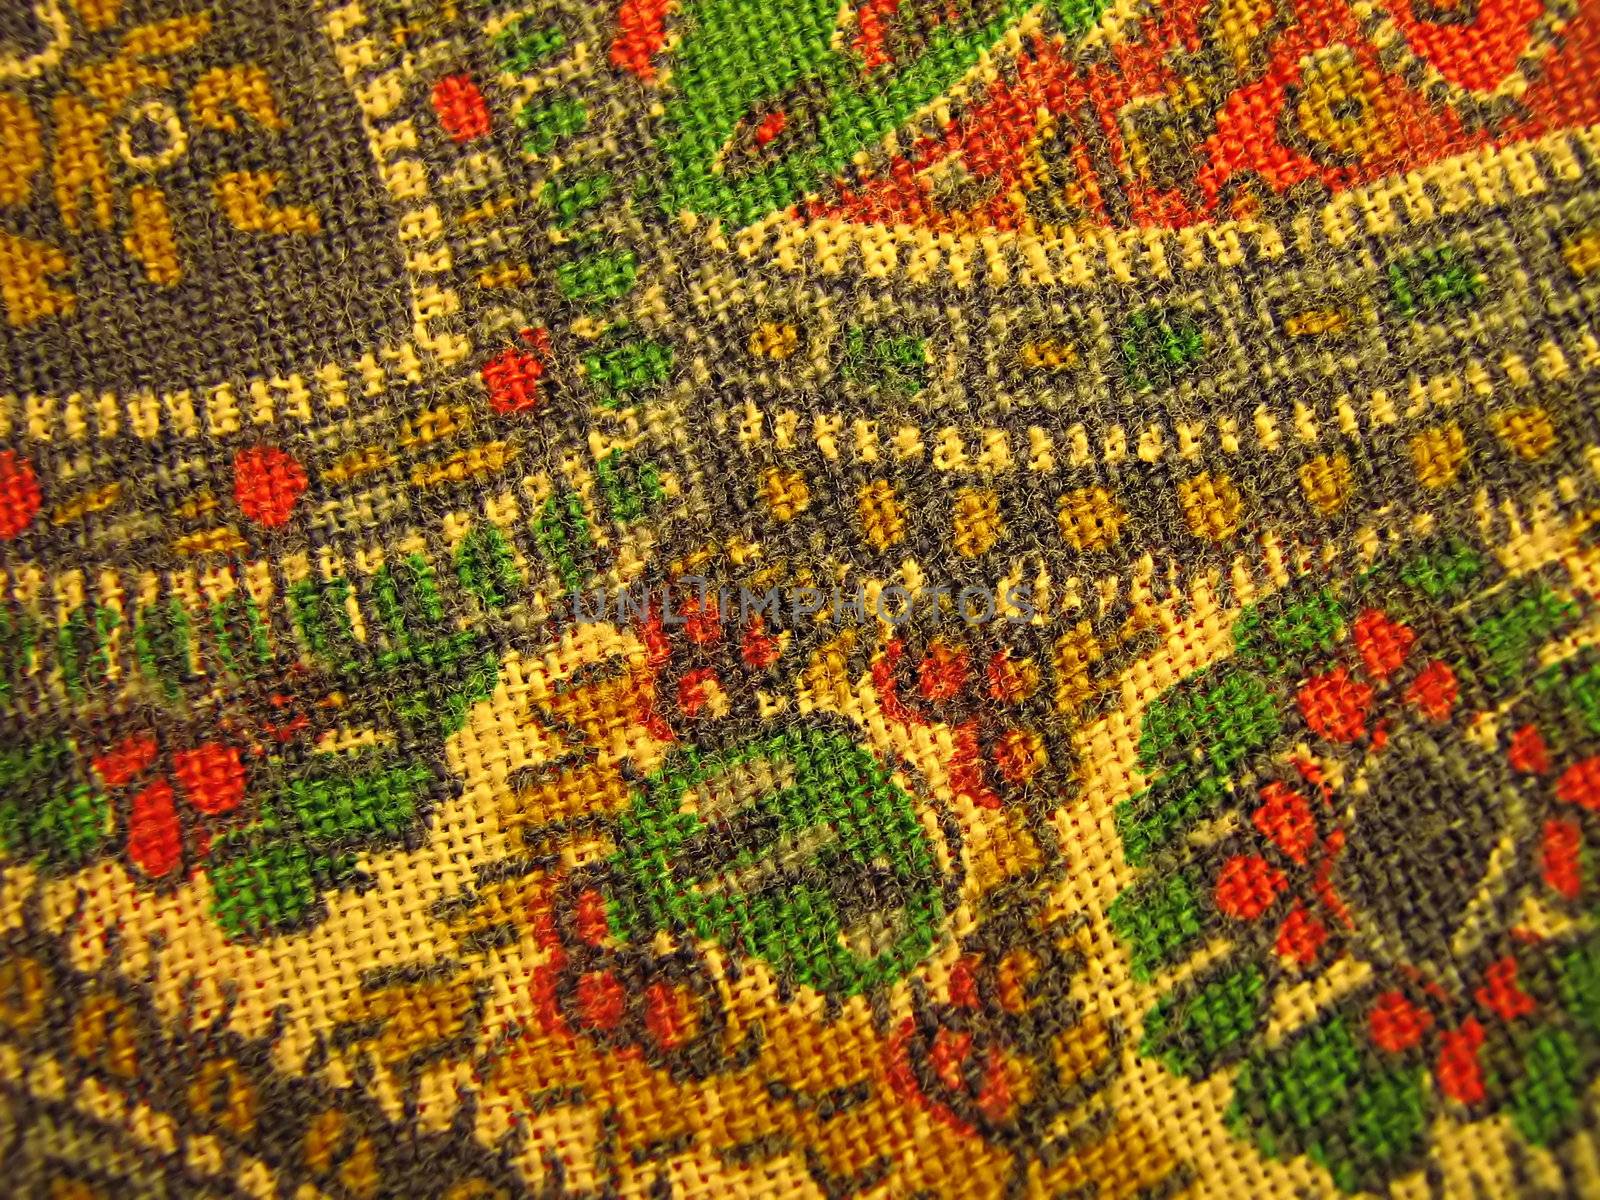 A photograph of paisley fabric detailing its pattern.